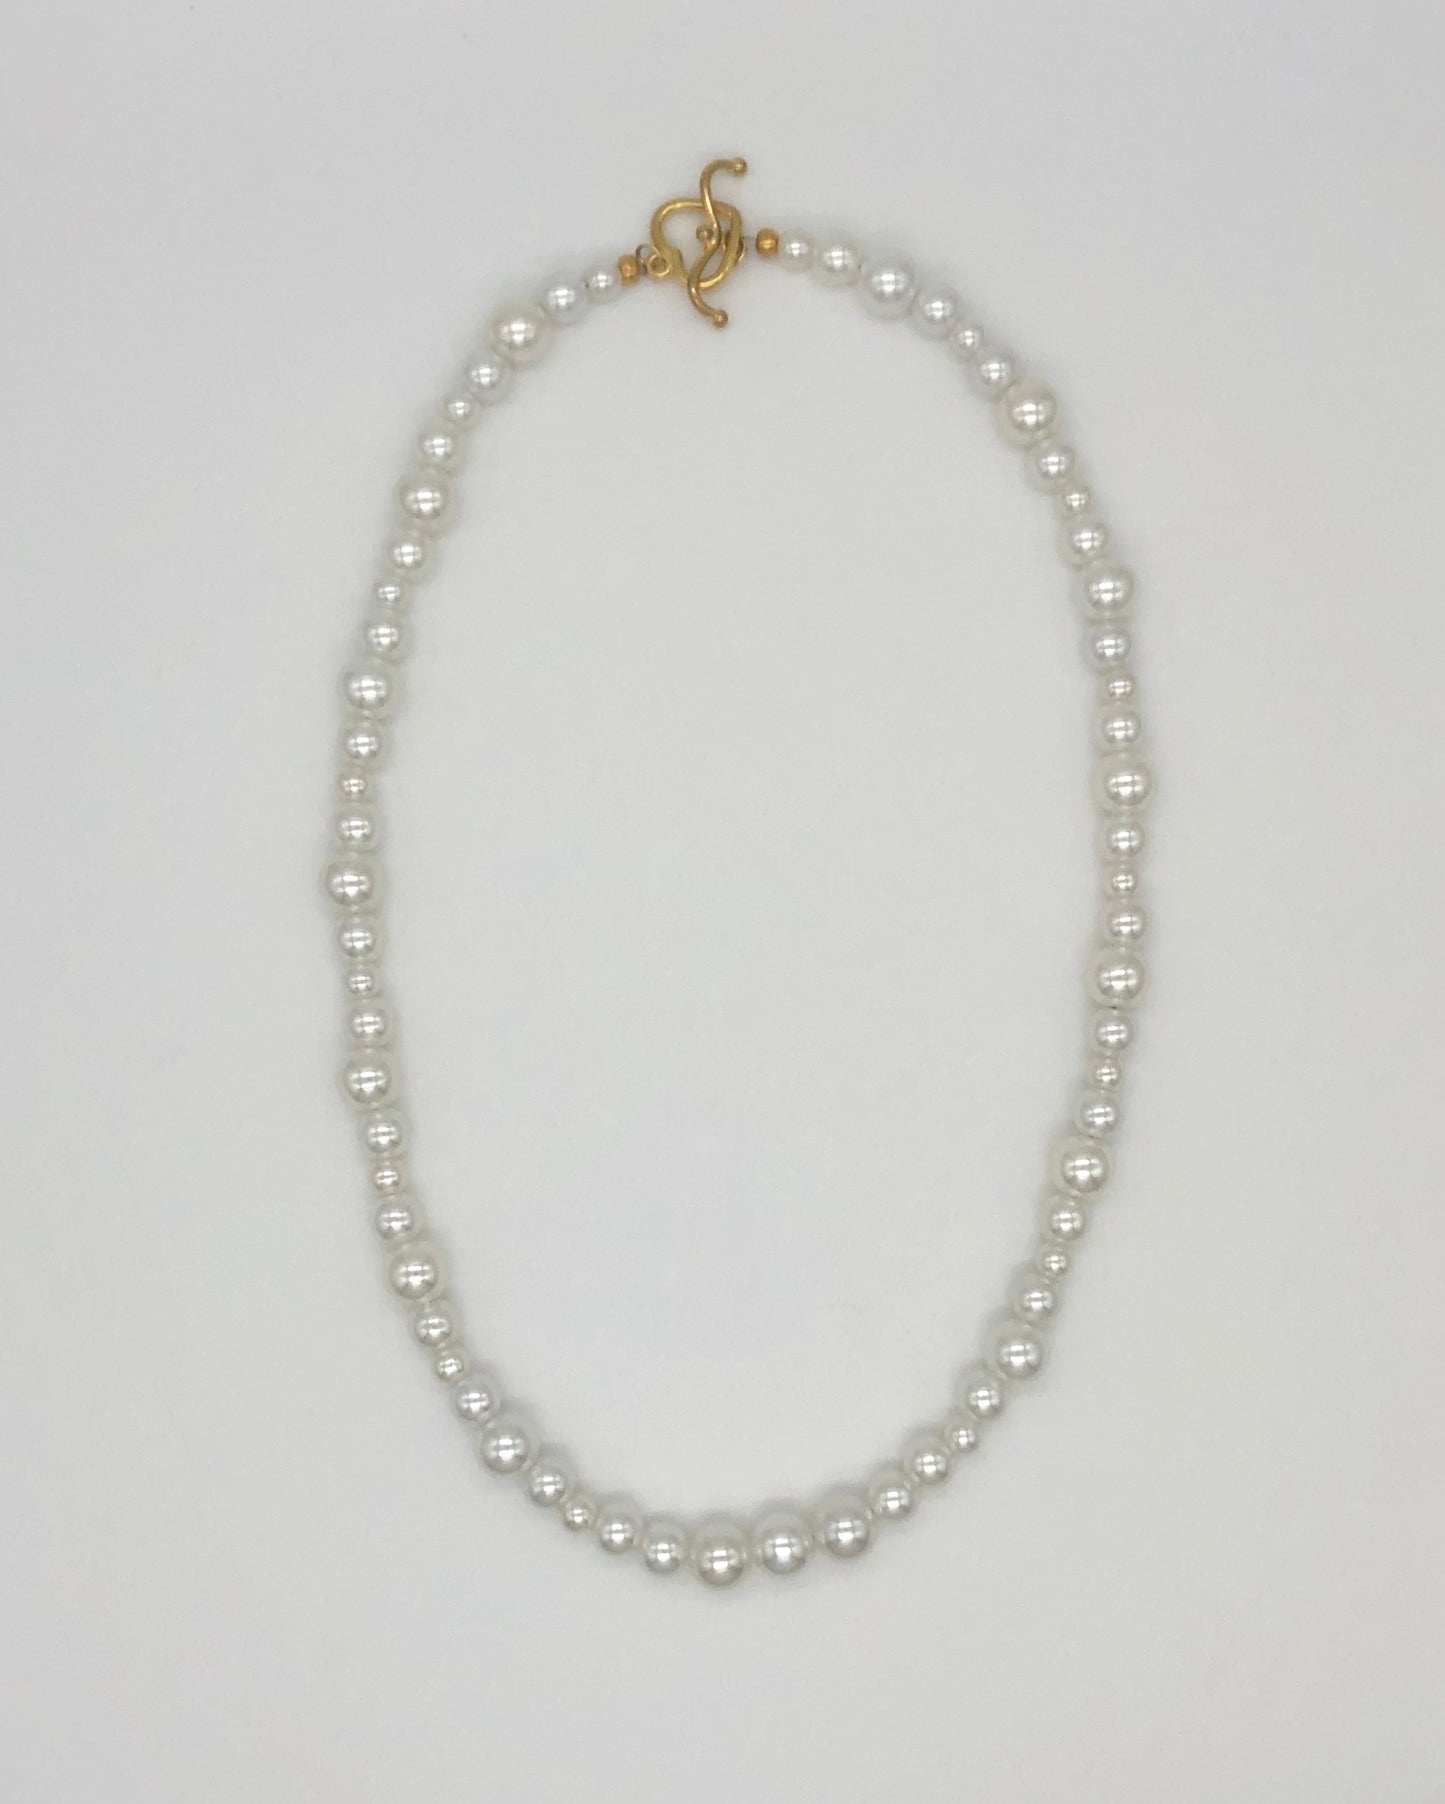 Faux pearl bead necklace with gold plated heart toggle clasp